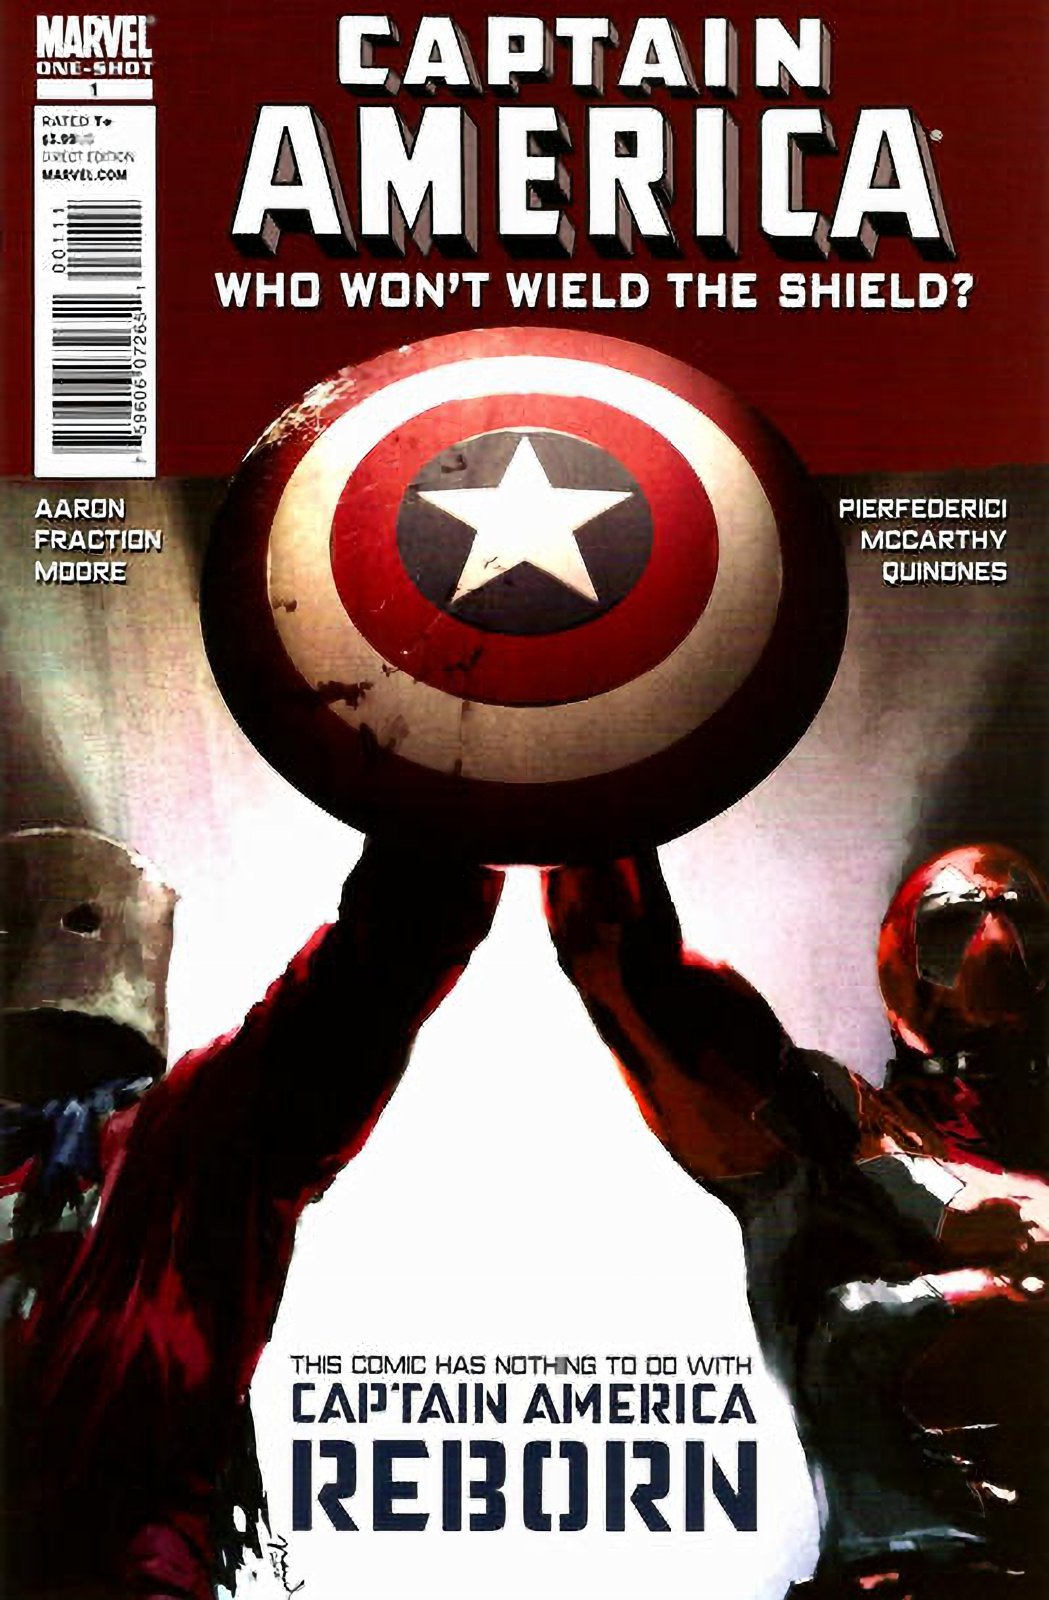 Captain America: Who Won't Wield the Shield #1 (2010) Marvel Comics